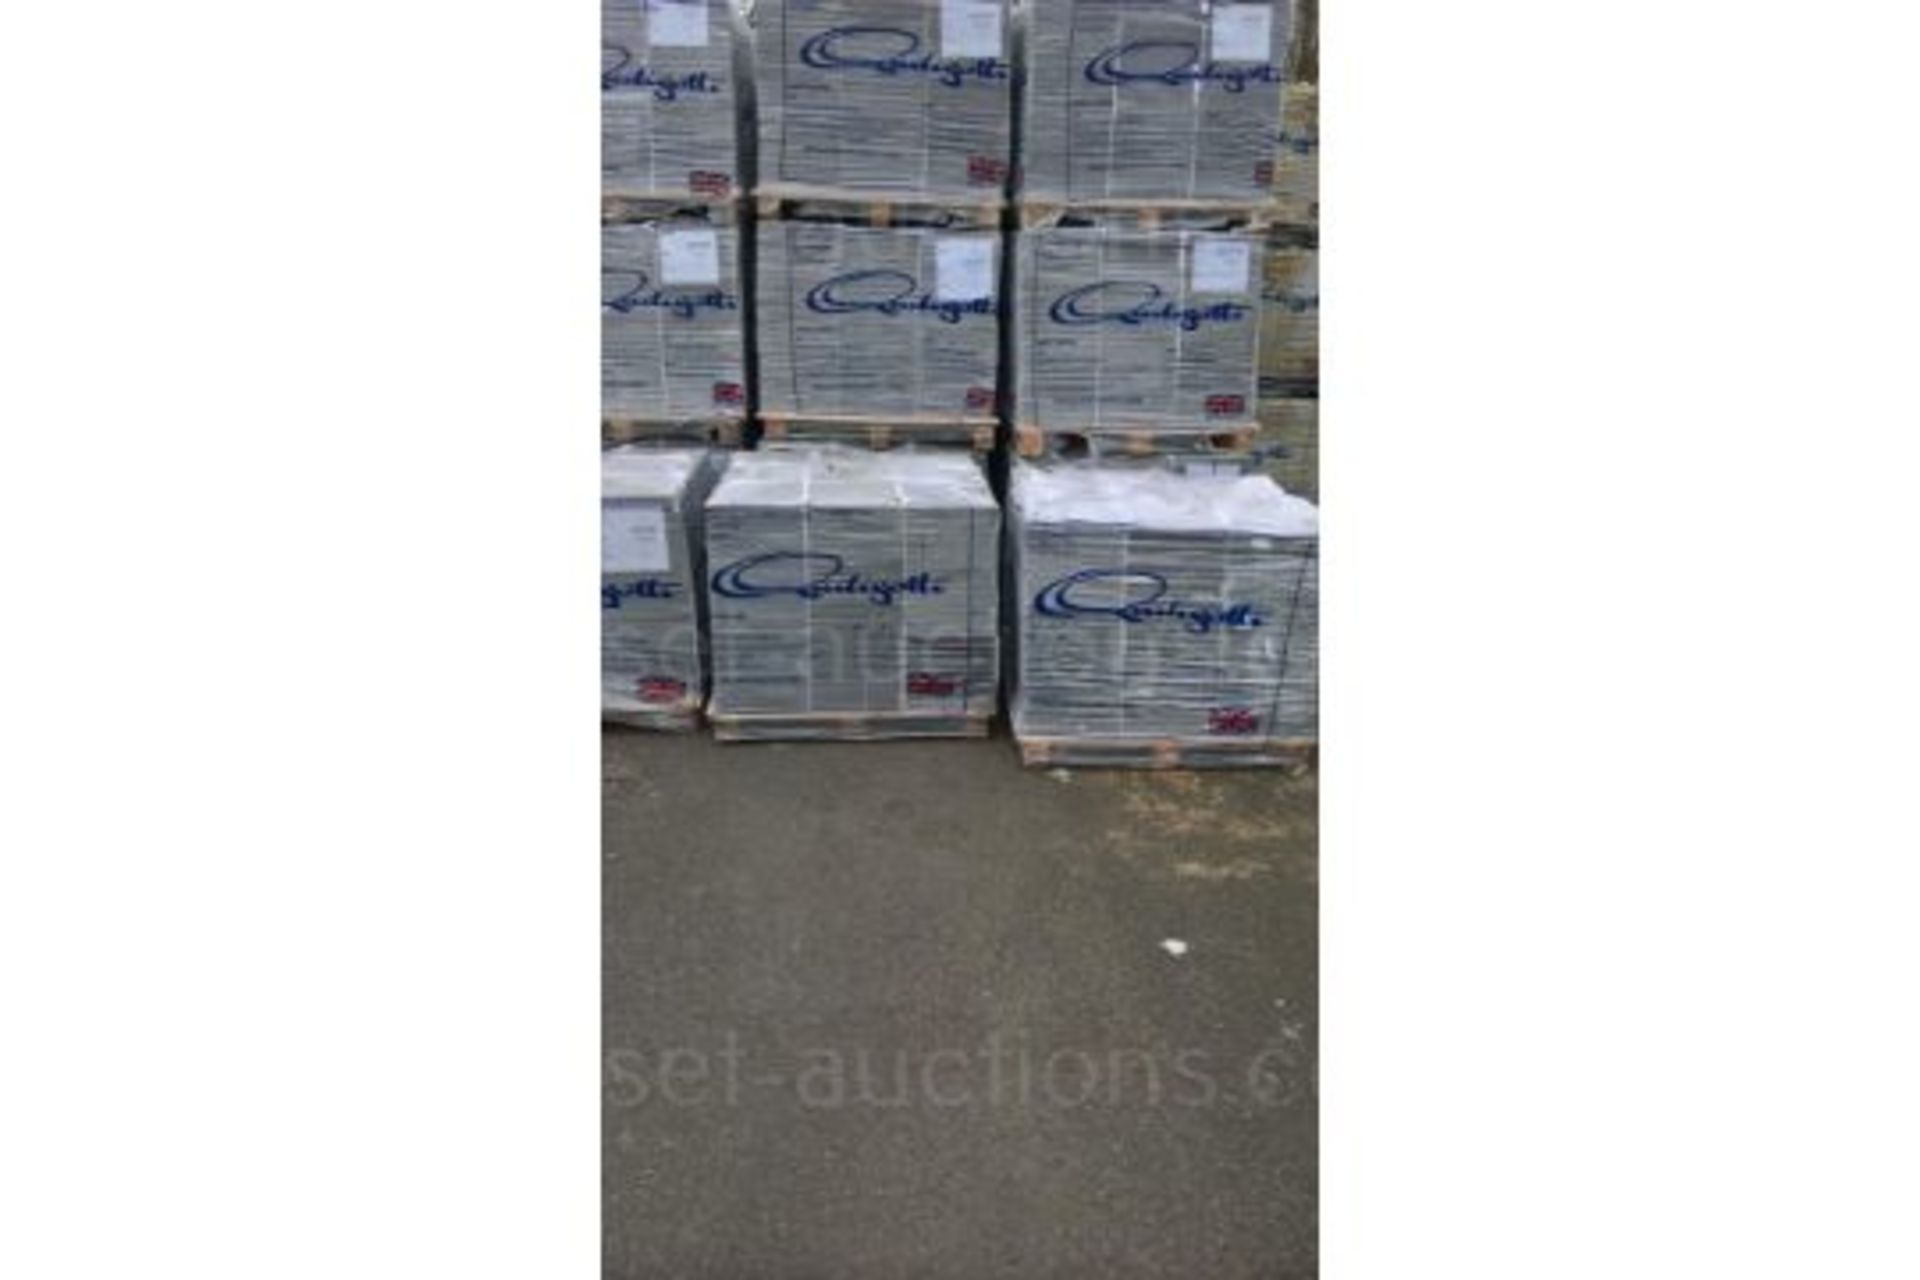 1 PALLET OF BRAND NEW GREY TERRAZZO COMMERCIAL TILES Z30099, COVERS 24 SQUARE YARDS *PLUS VAT* - Image 2 of 3